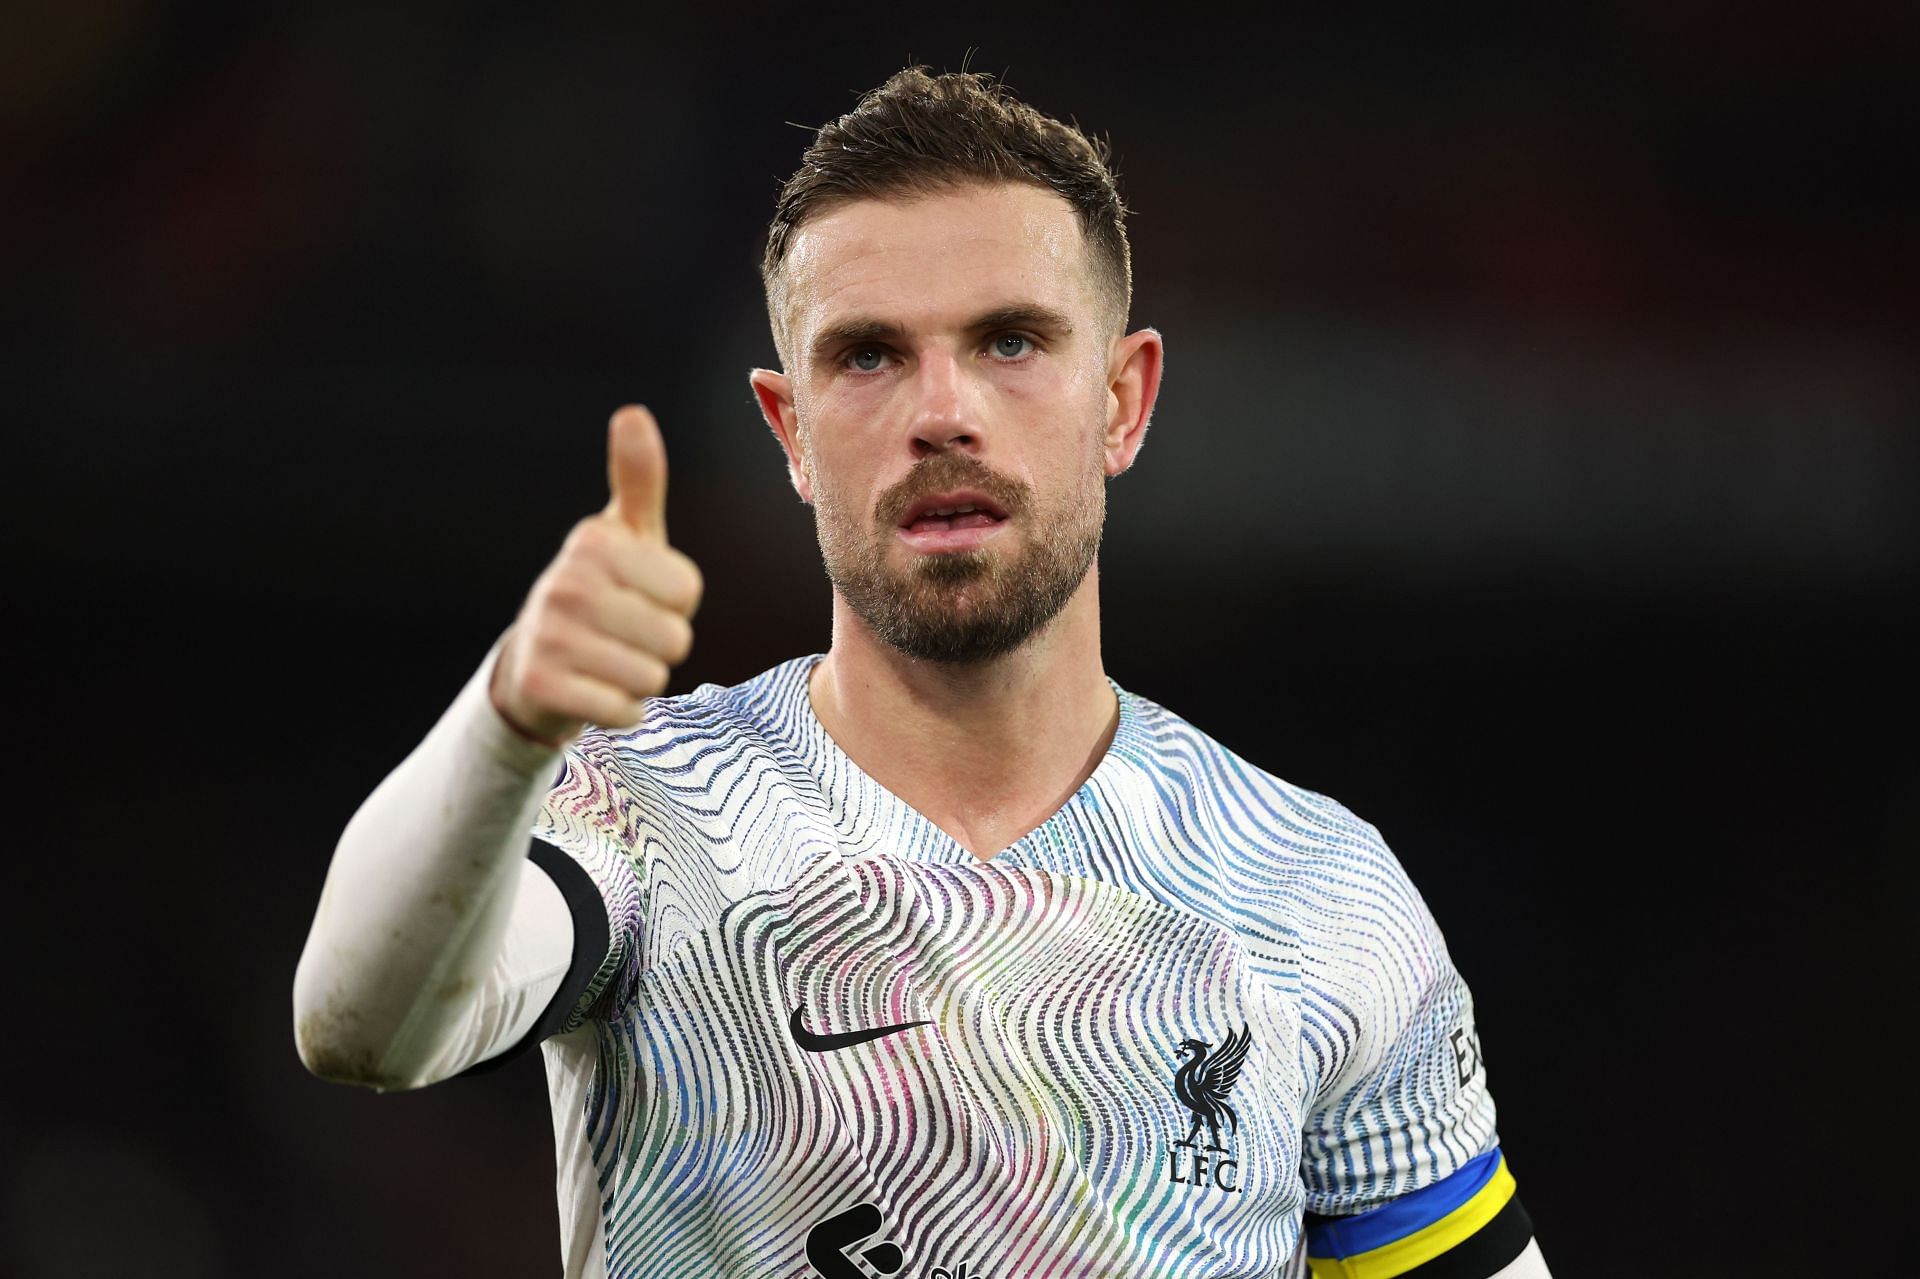 Jordan Henderson wants his side to keep up the winning form.